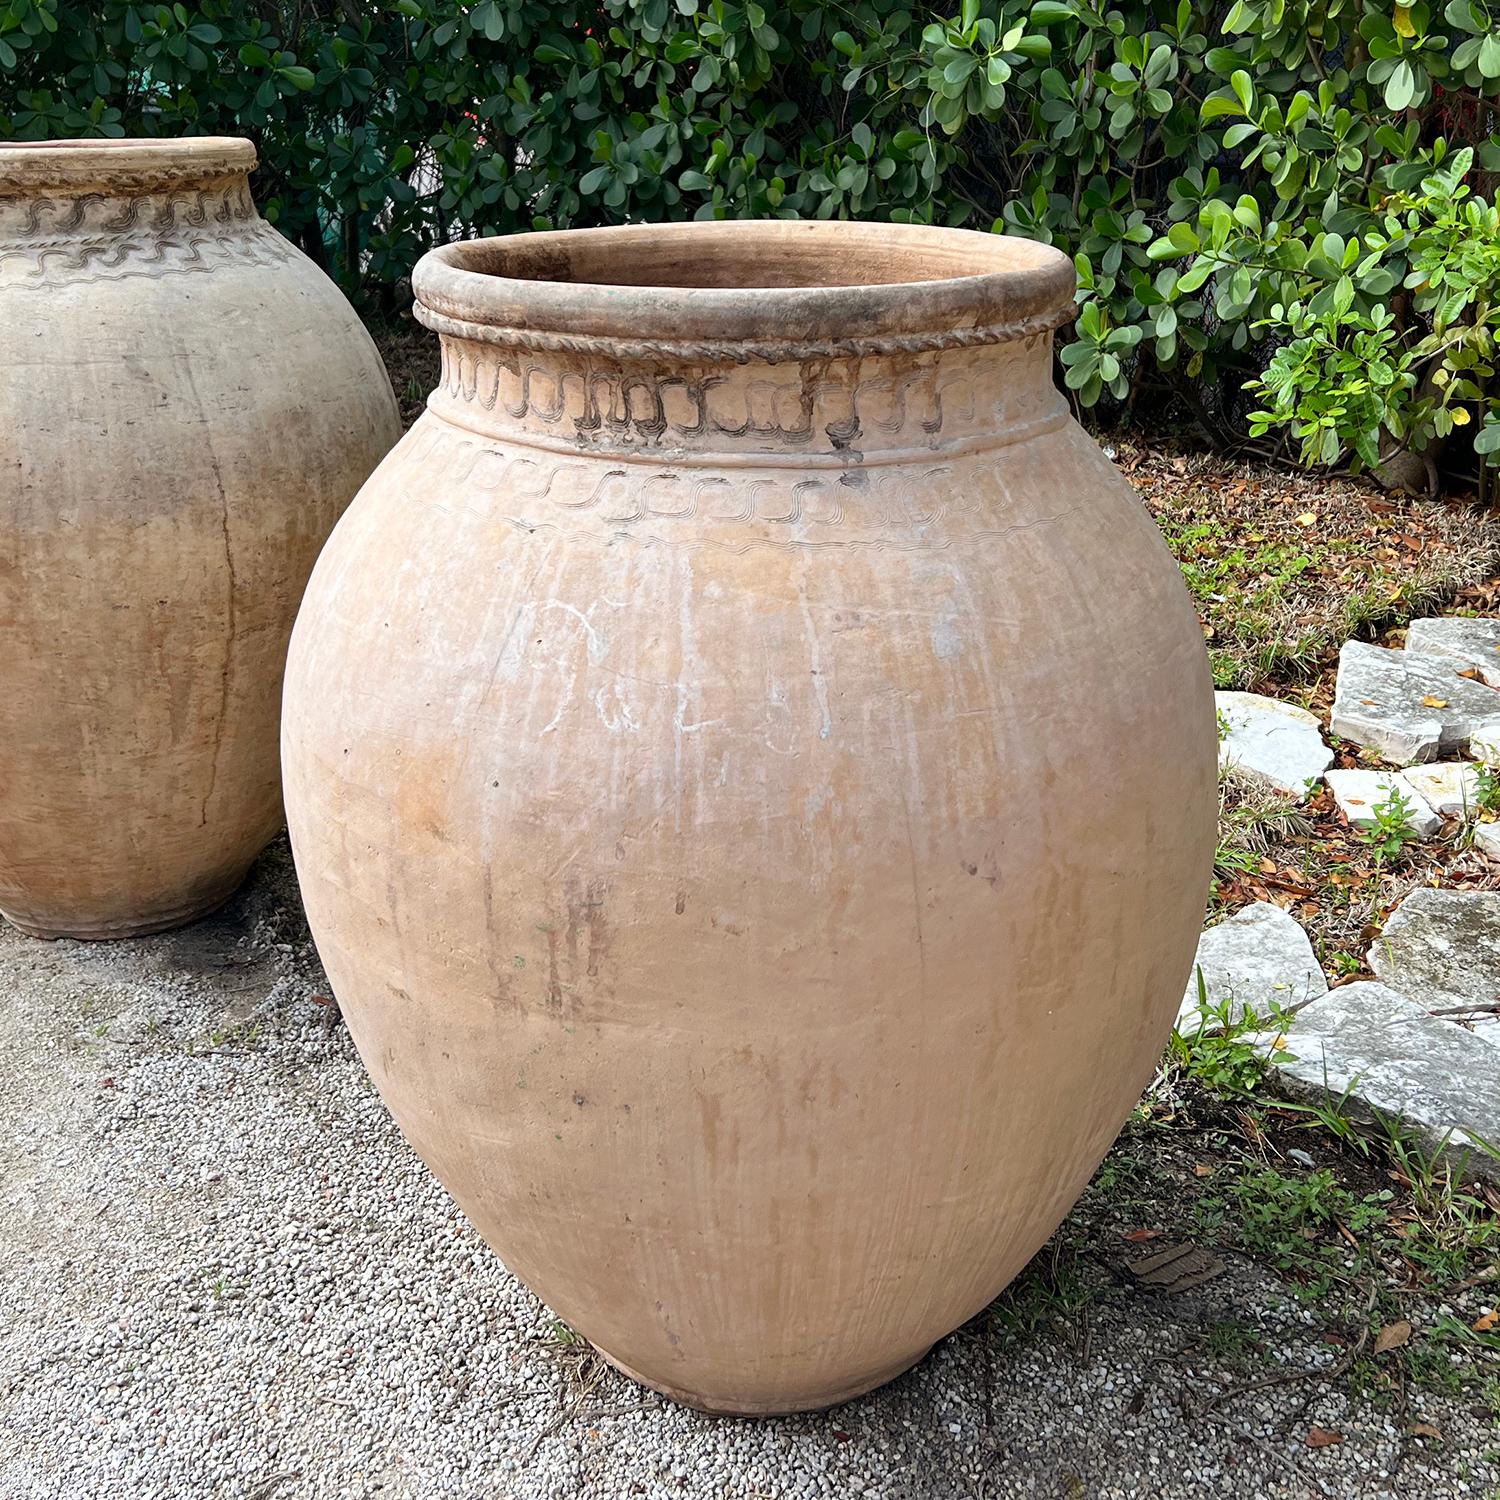 A terracotta clay Sicilian Oil Jar or amphora, in good condition. The mouth of this 19th Century garden vessel is decorated with fine décor. These typical Sicilian jars were traditionally used to store olive oil. These pots have no handles and have